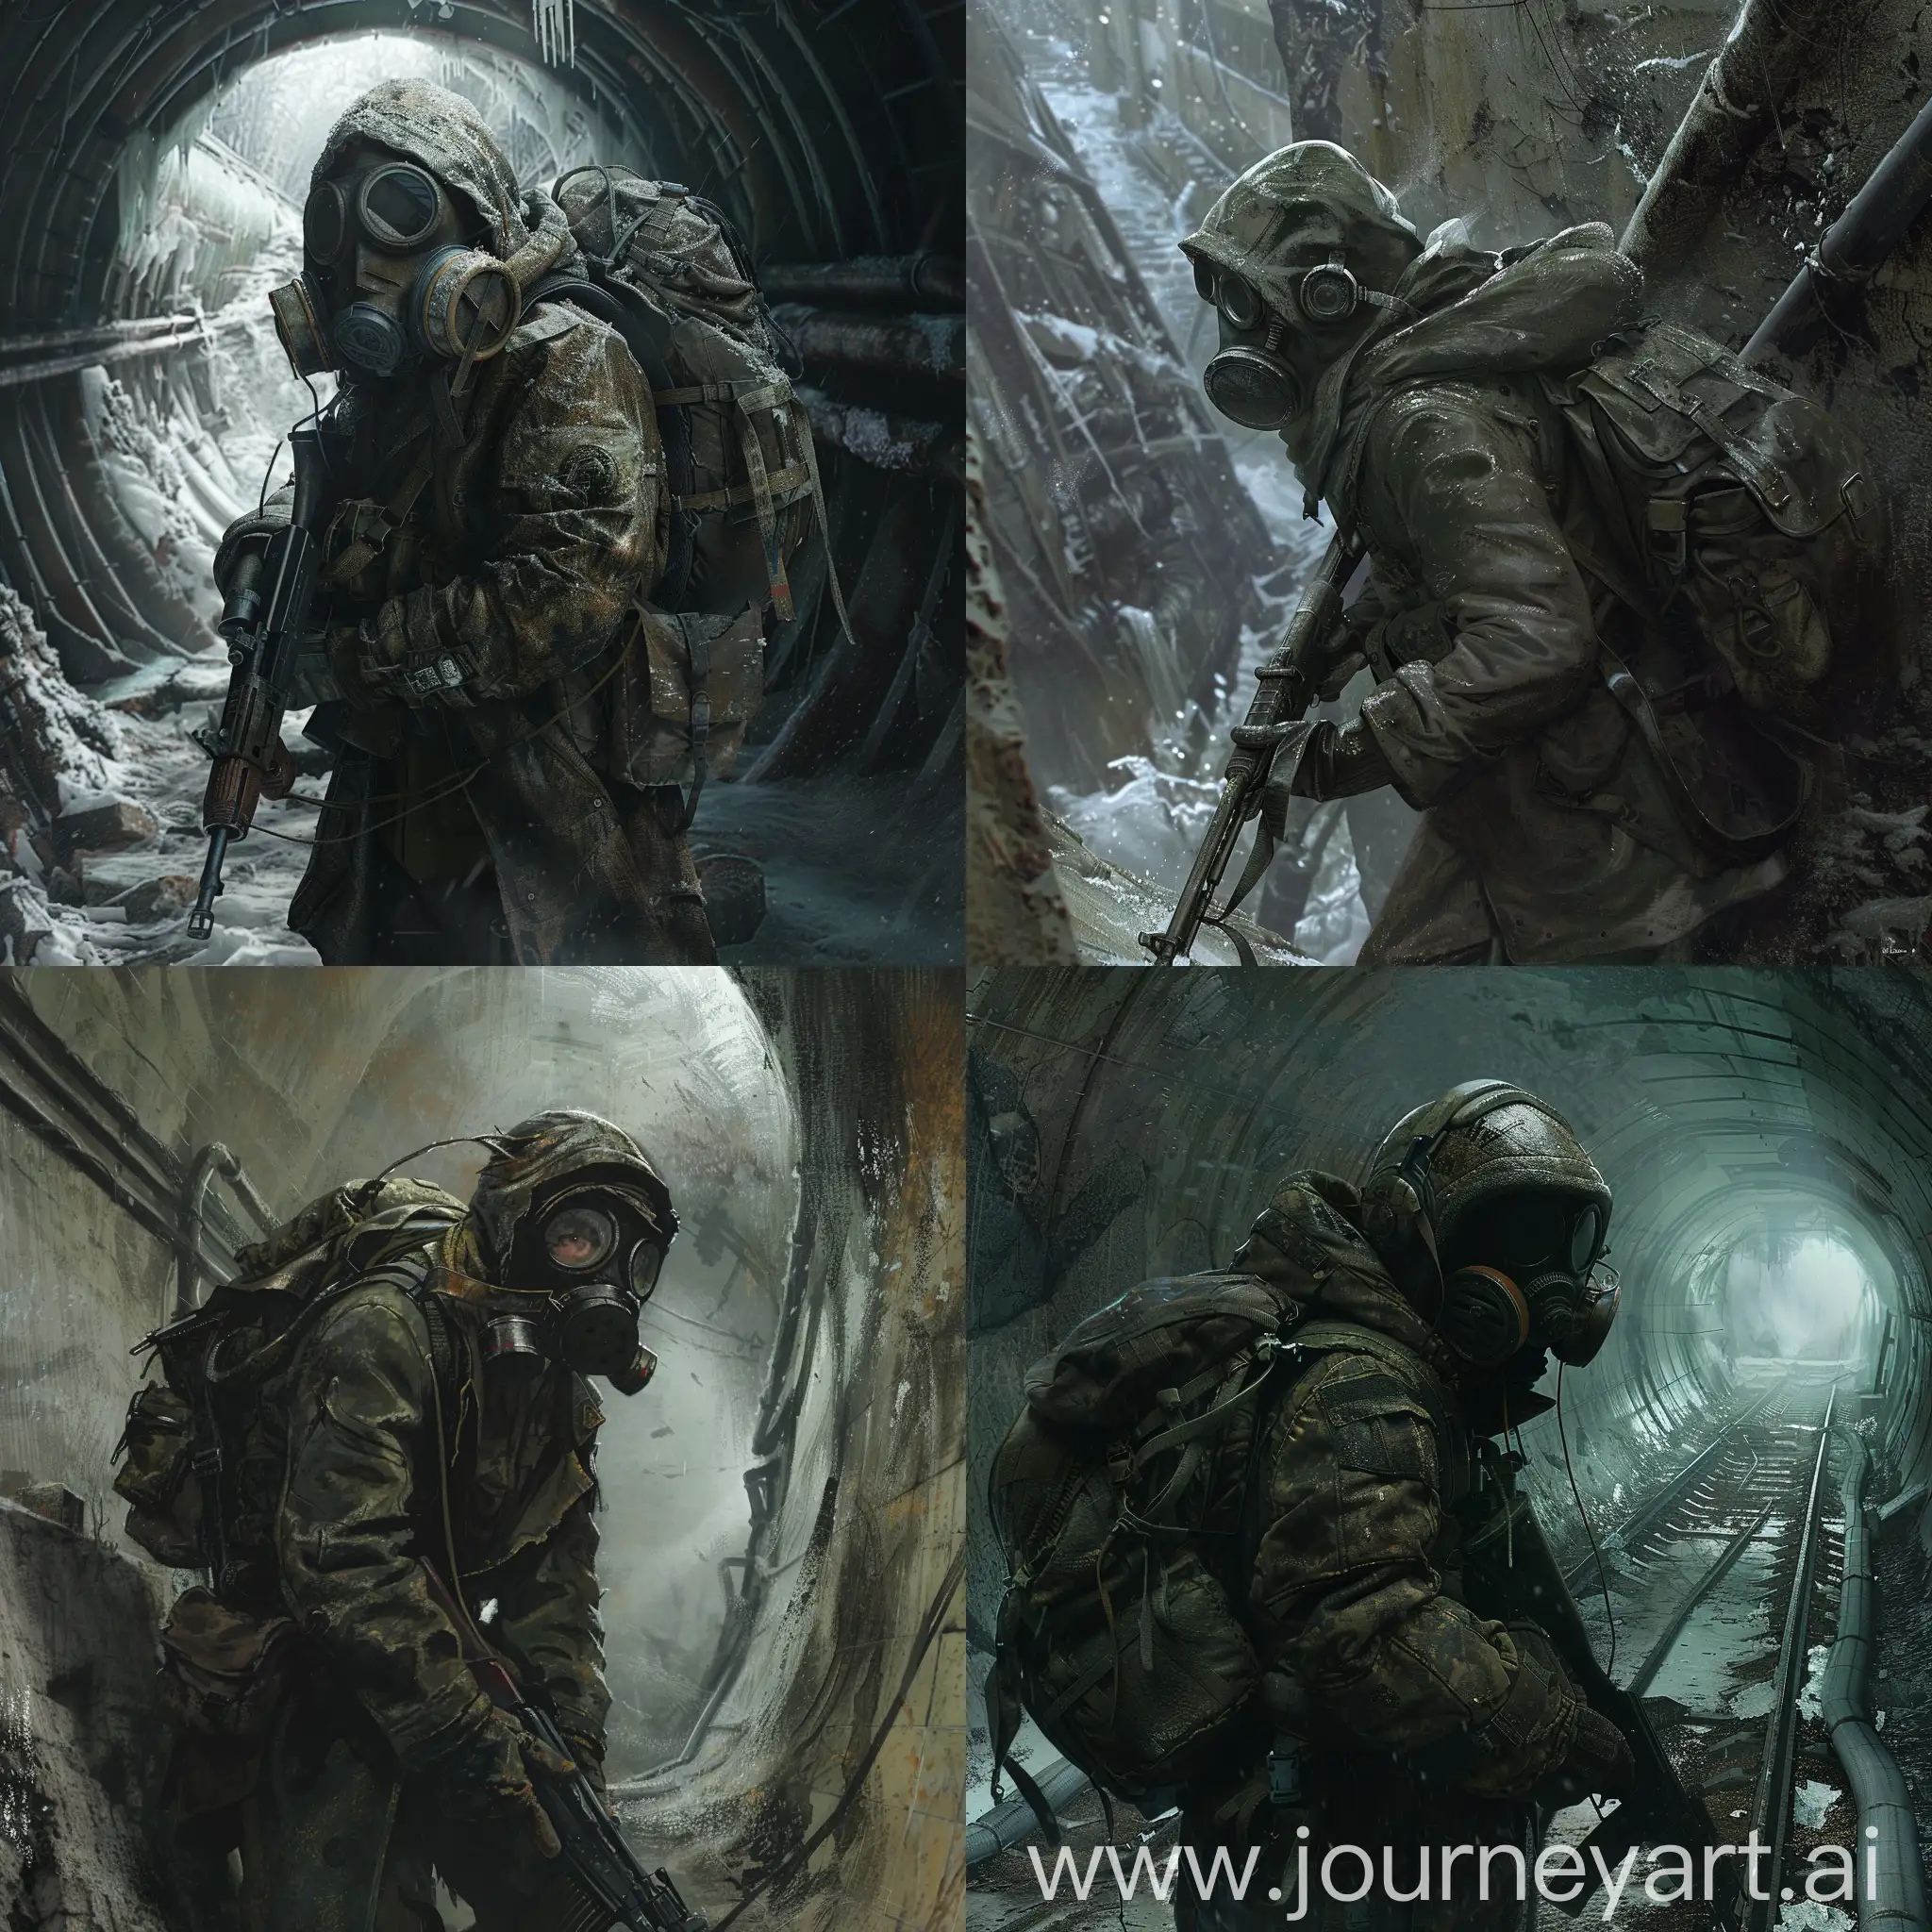 Art in the Metro 2033 universe, a stalker in a GP-5 gas mask, in a hat with earflaps, in an old and sometimes torn Soviet overcoat with Soviet light unloading, with a backpack on his back and a Kalashnikov assault rifle in his hand, climbs to the surface of the abandoned, destroyed and radioactive nuclear winter of Moscow, a stalker climbs half out of the sewer catacombs, and opening The lid of the sewer catacombs peeks out to the surface, a gloomy, abandoned post-apocalyptic atmosphere.